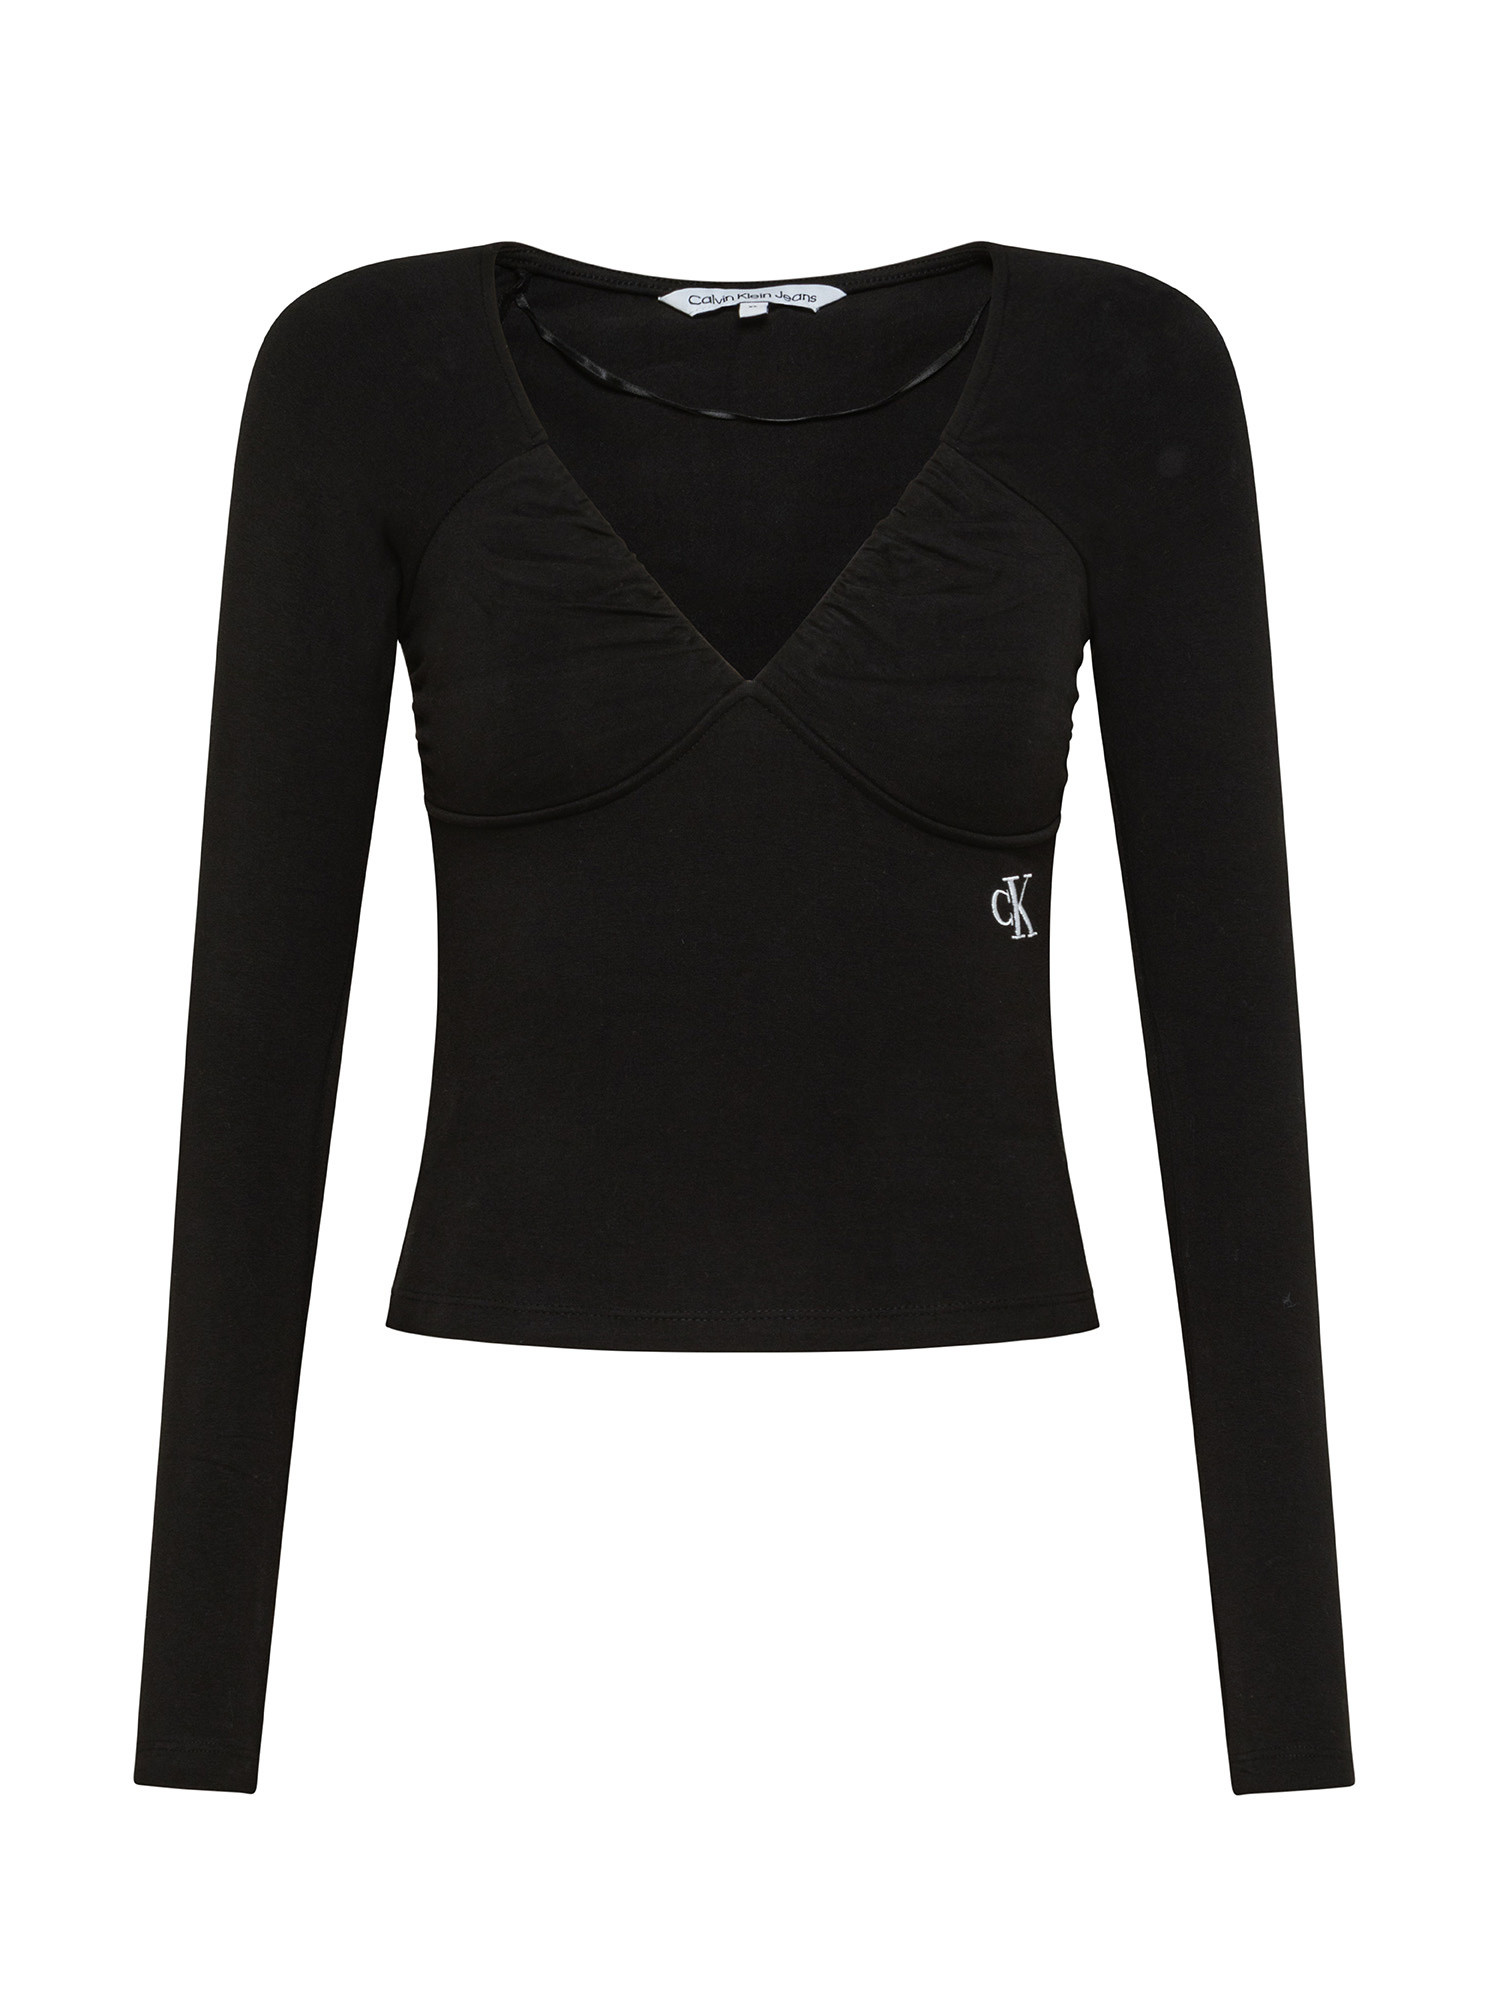 Top in maglia con logo, Nero, large image number 0